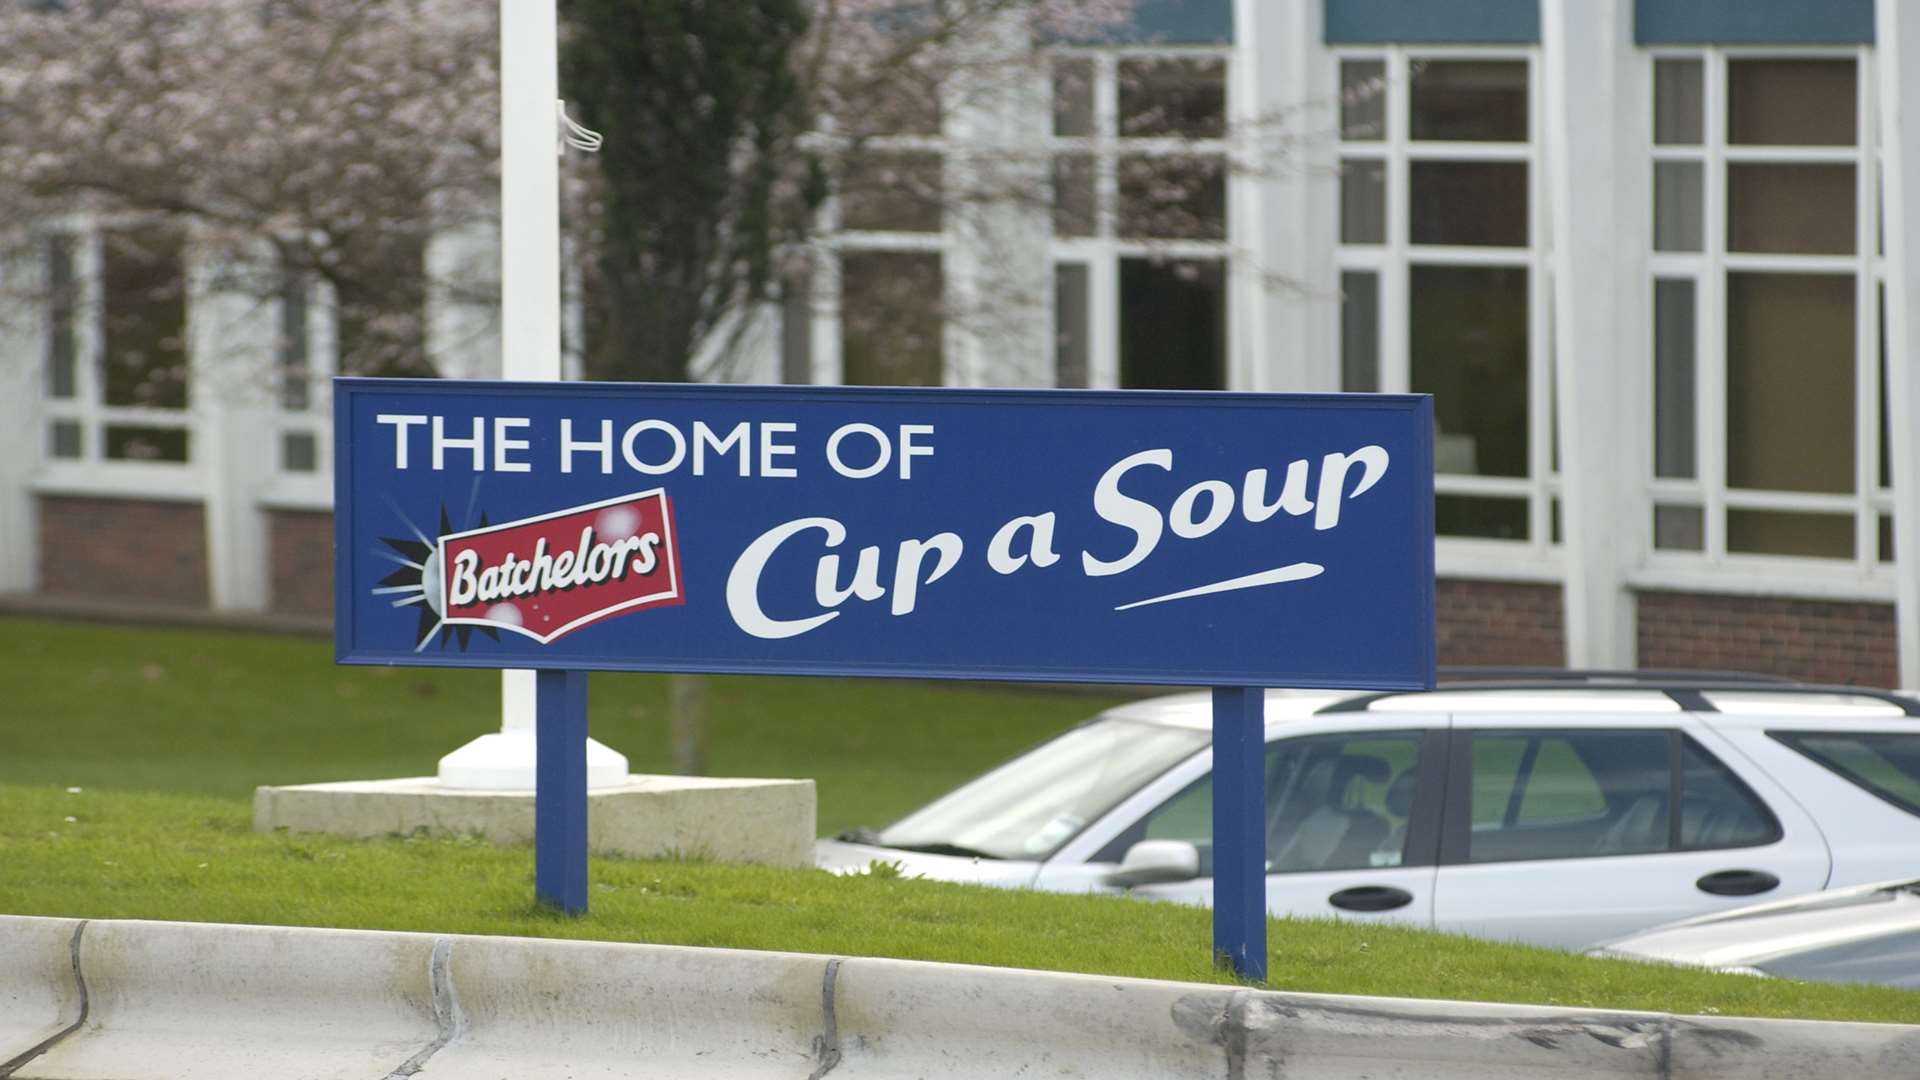 Batchelors Cup a Soup factory in Ashford